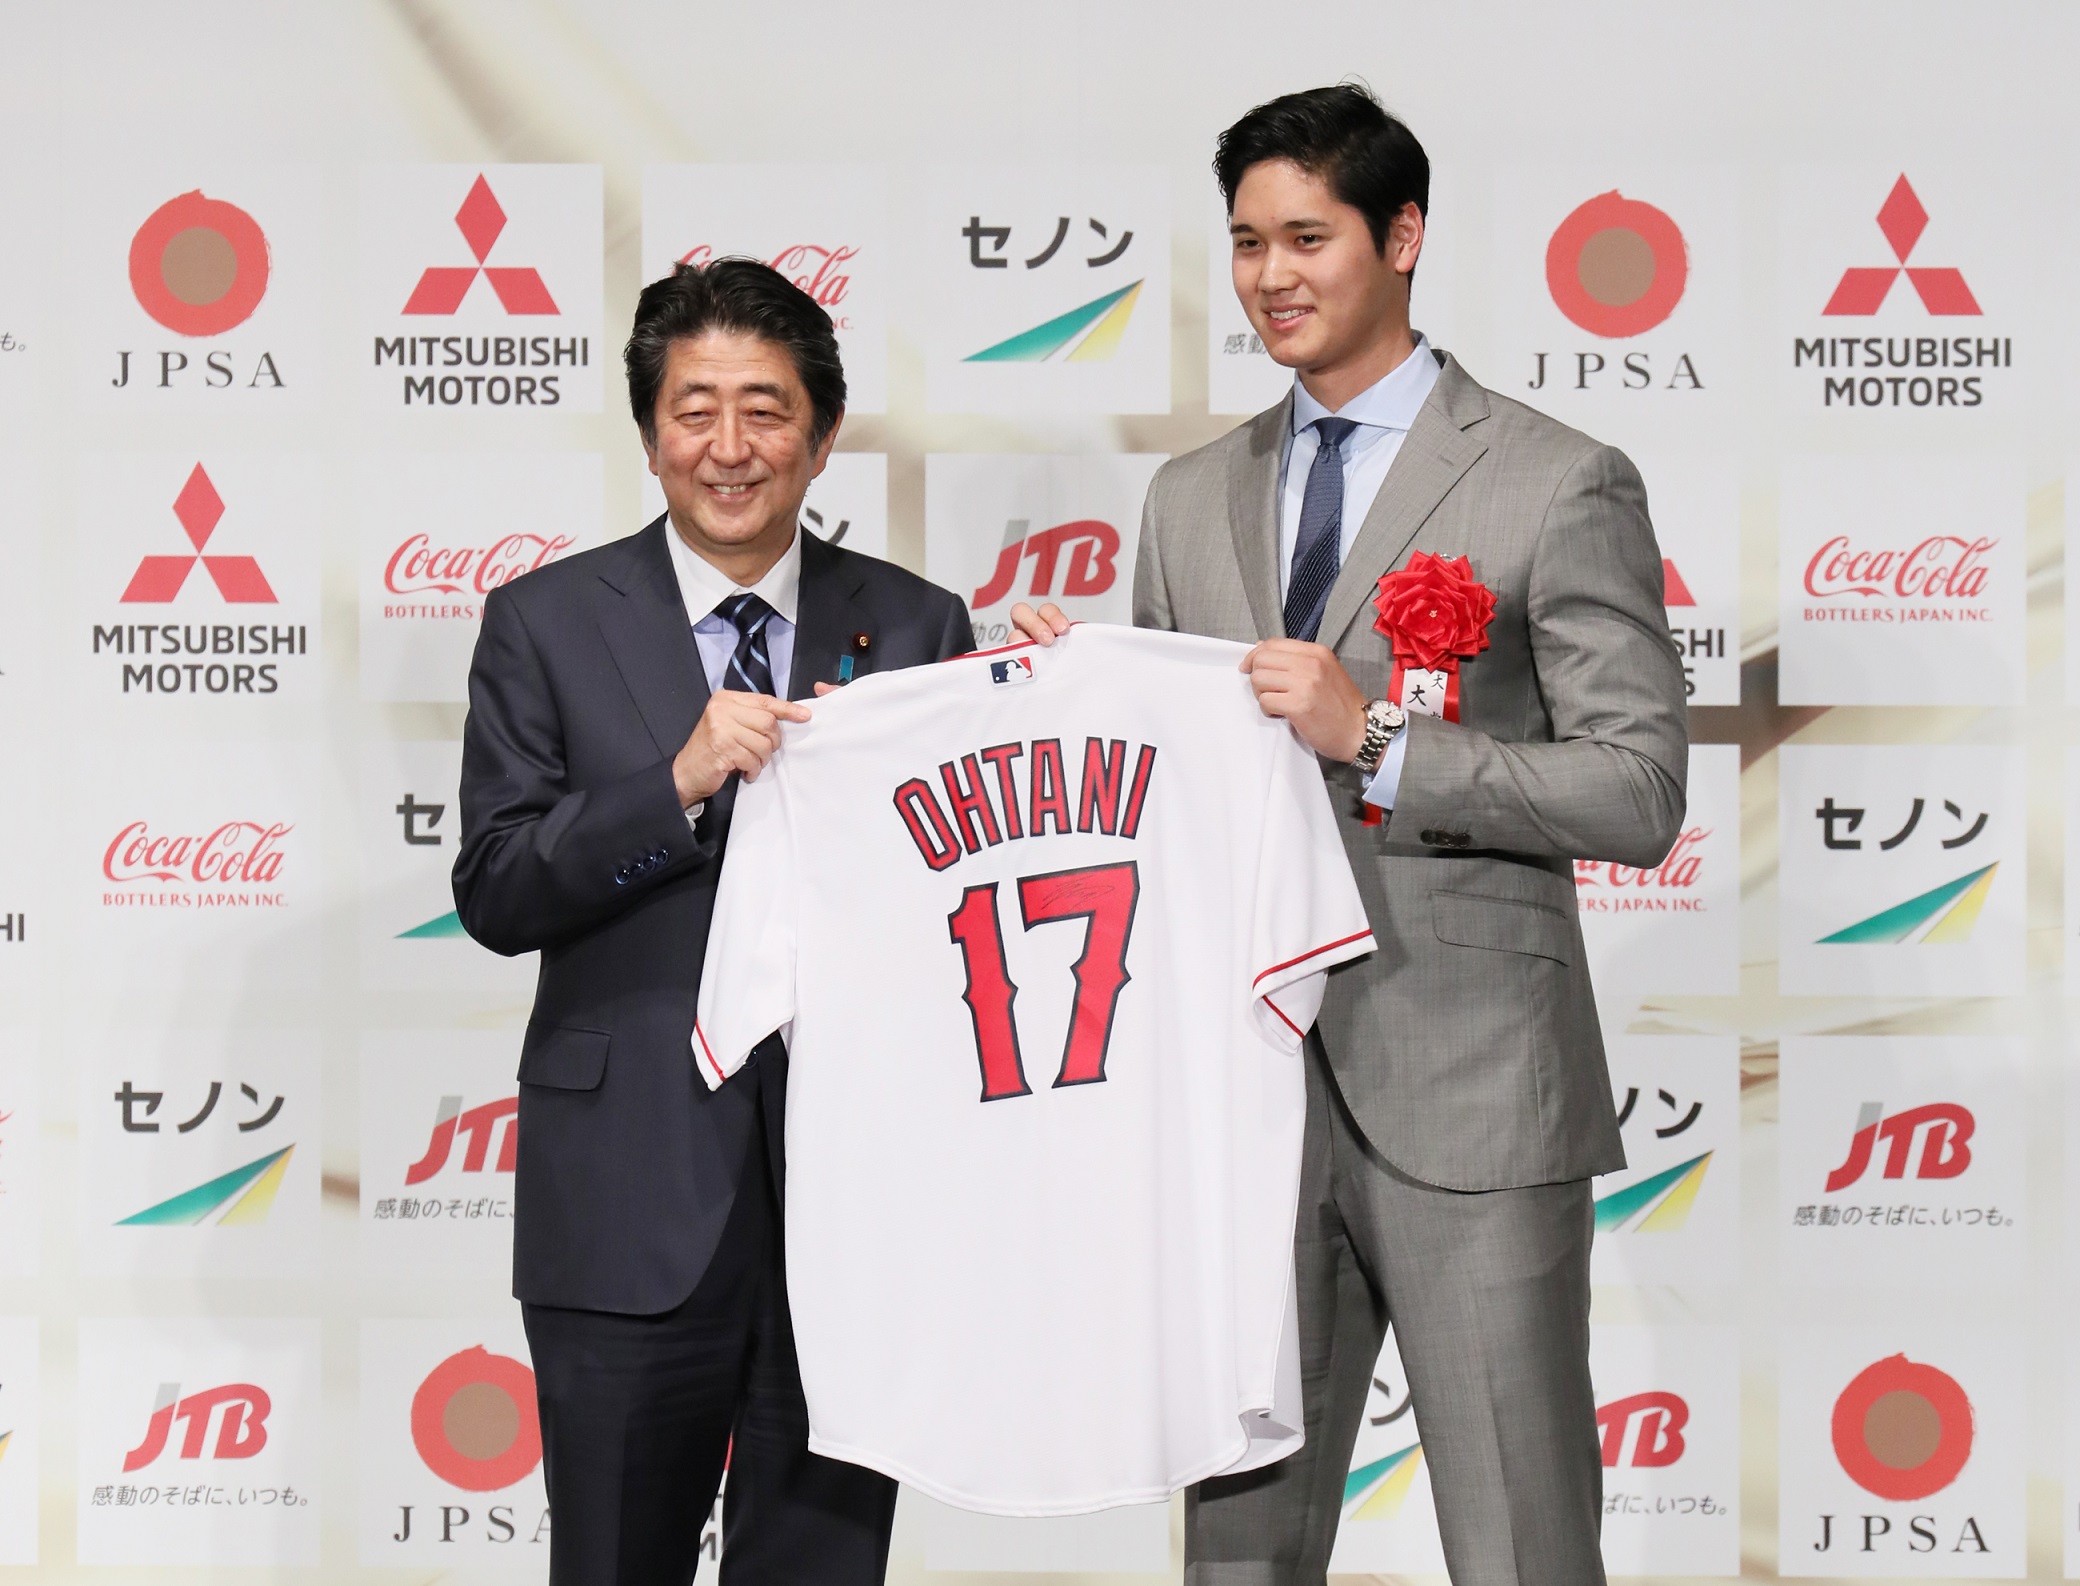 Photograph of the Prime Minister receiving a commemorative gift from Mr. Ohtani